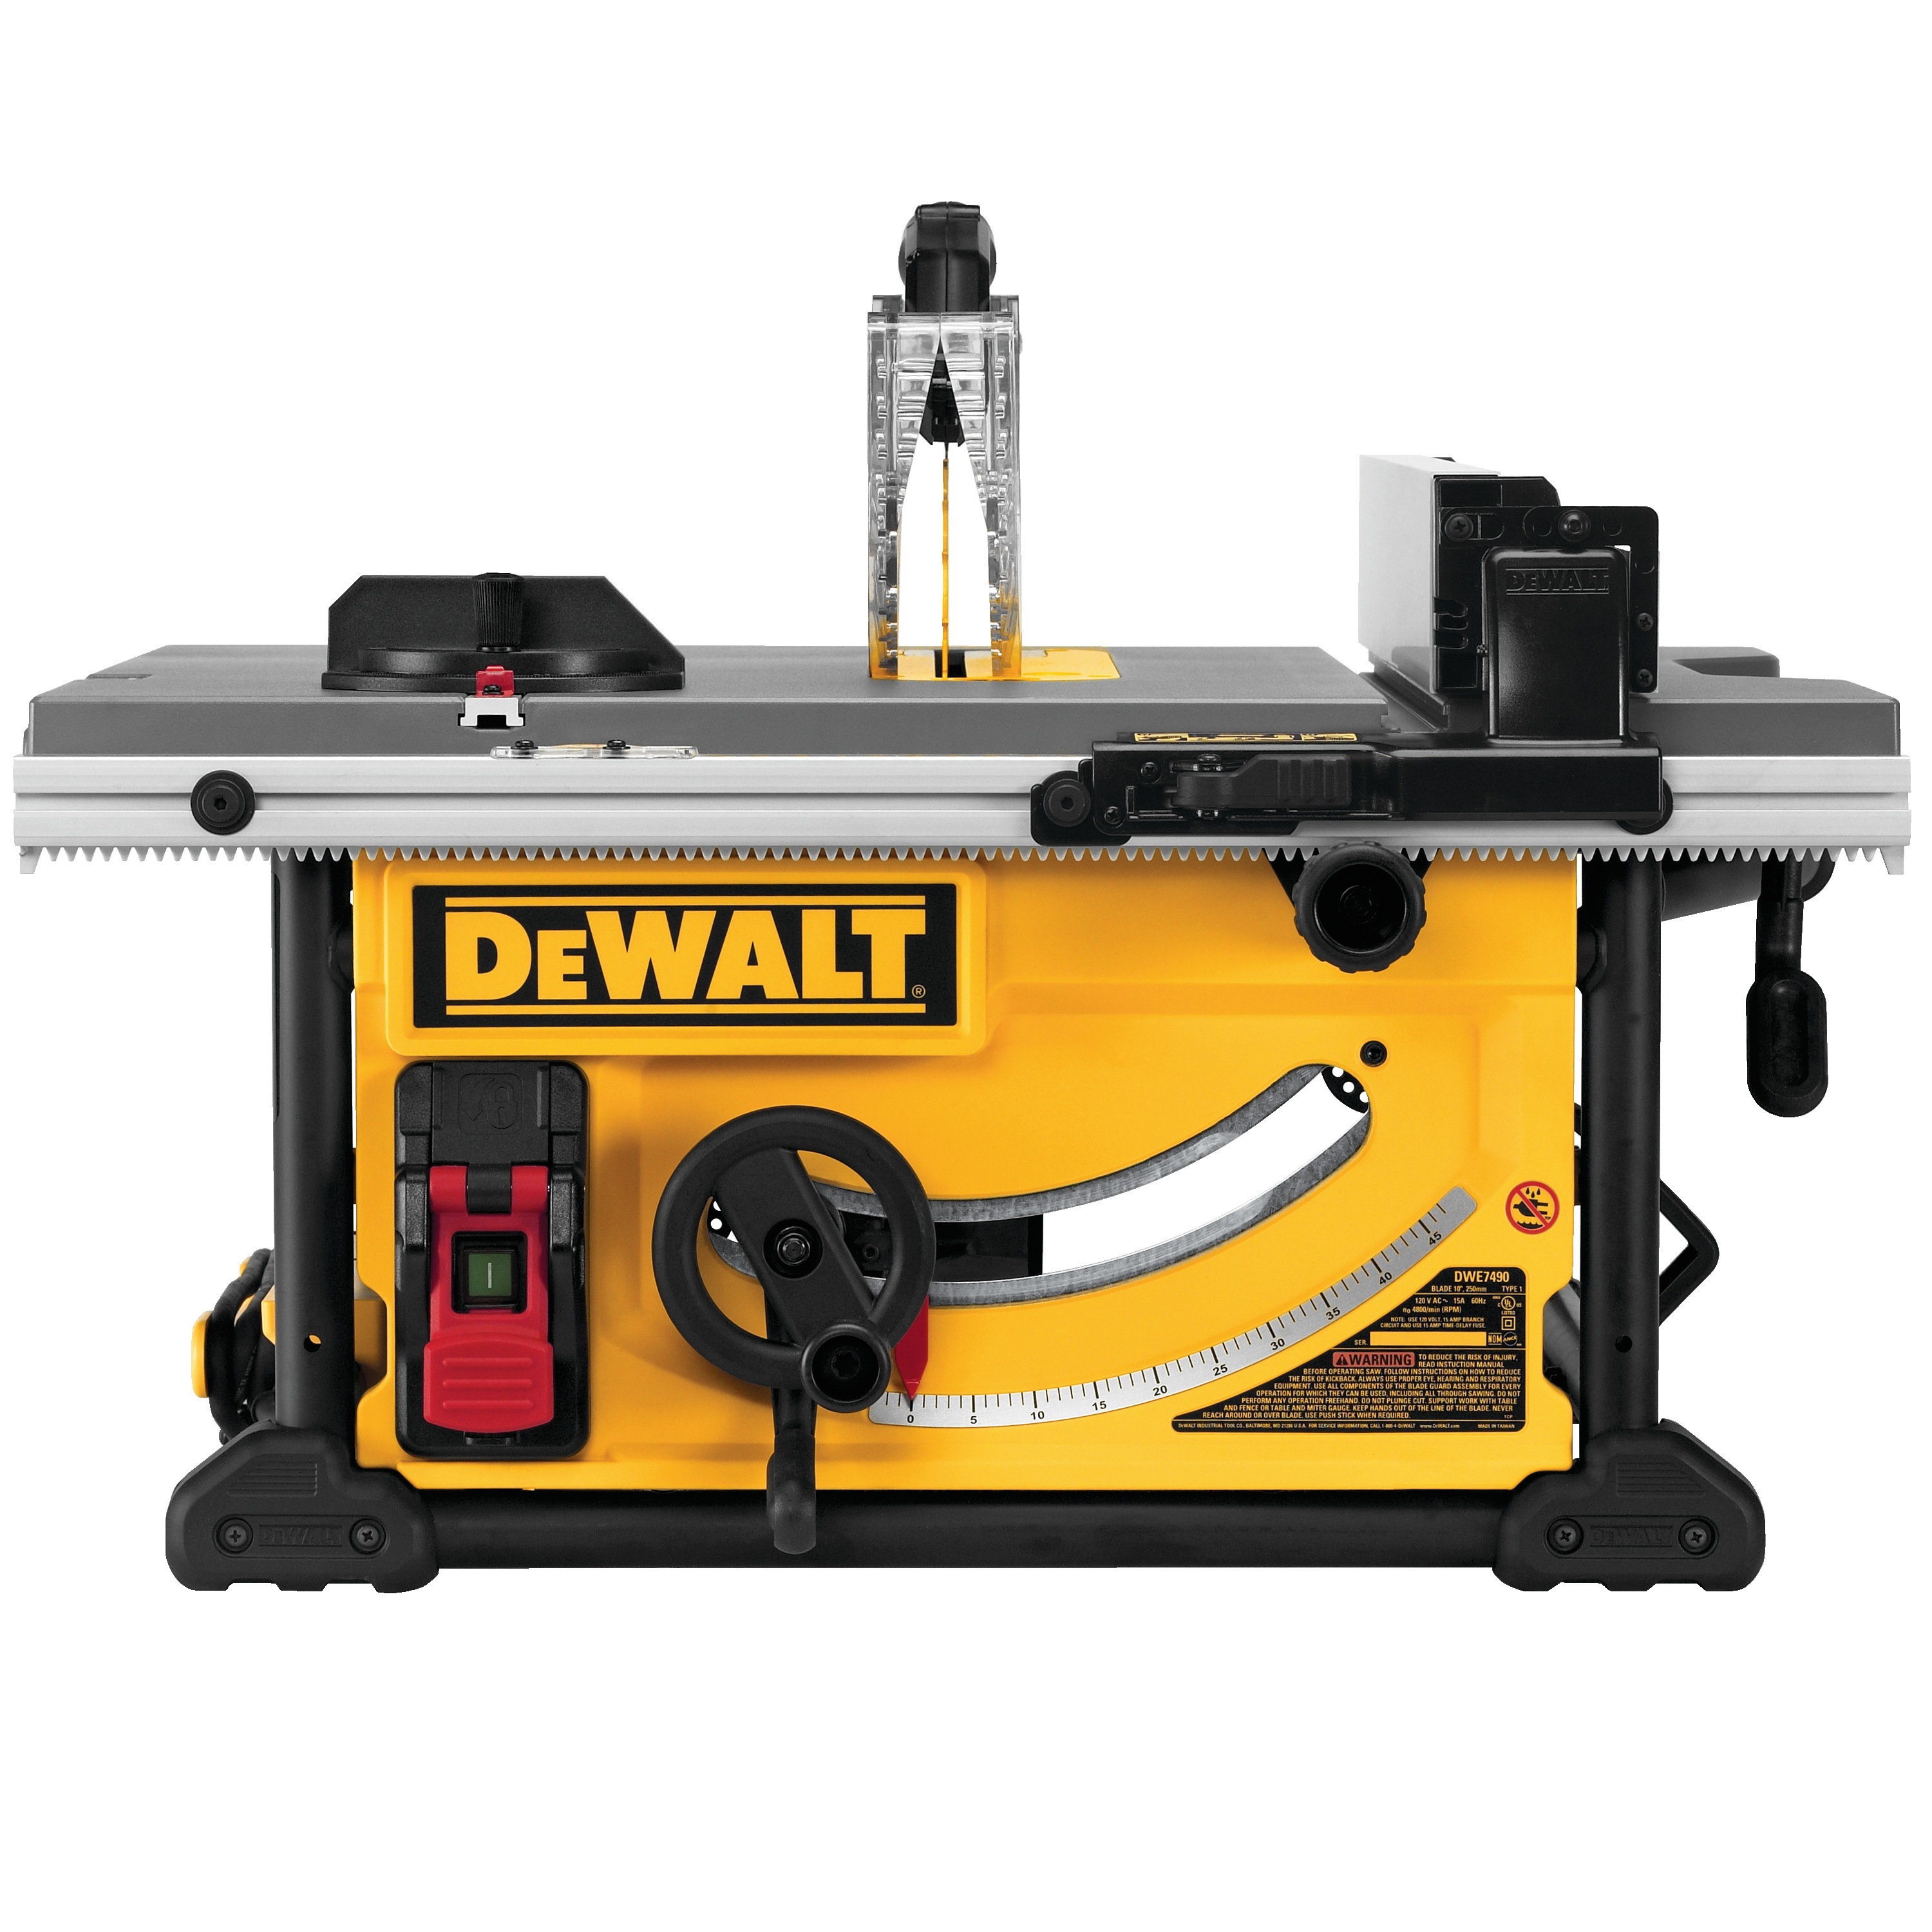 Profile of 10 inch Jobsite table saw  32 and half inch rip capacity and a rolling stand 